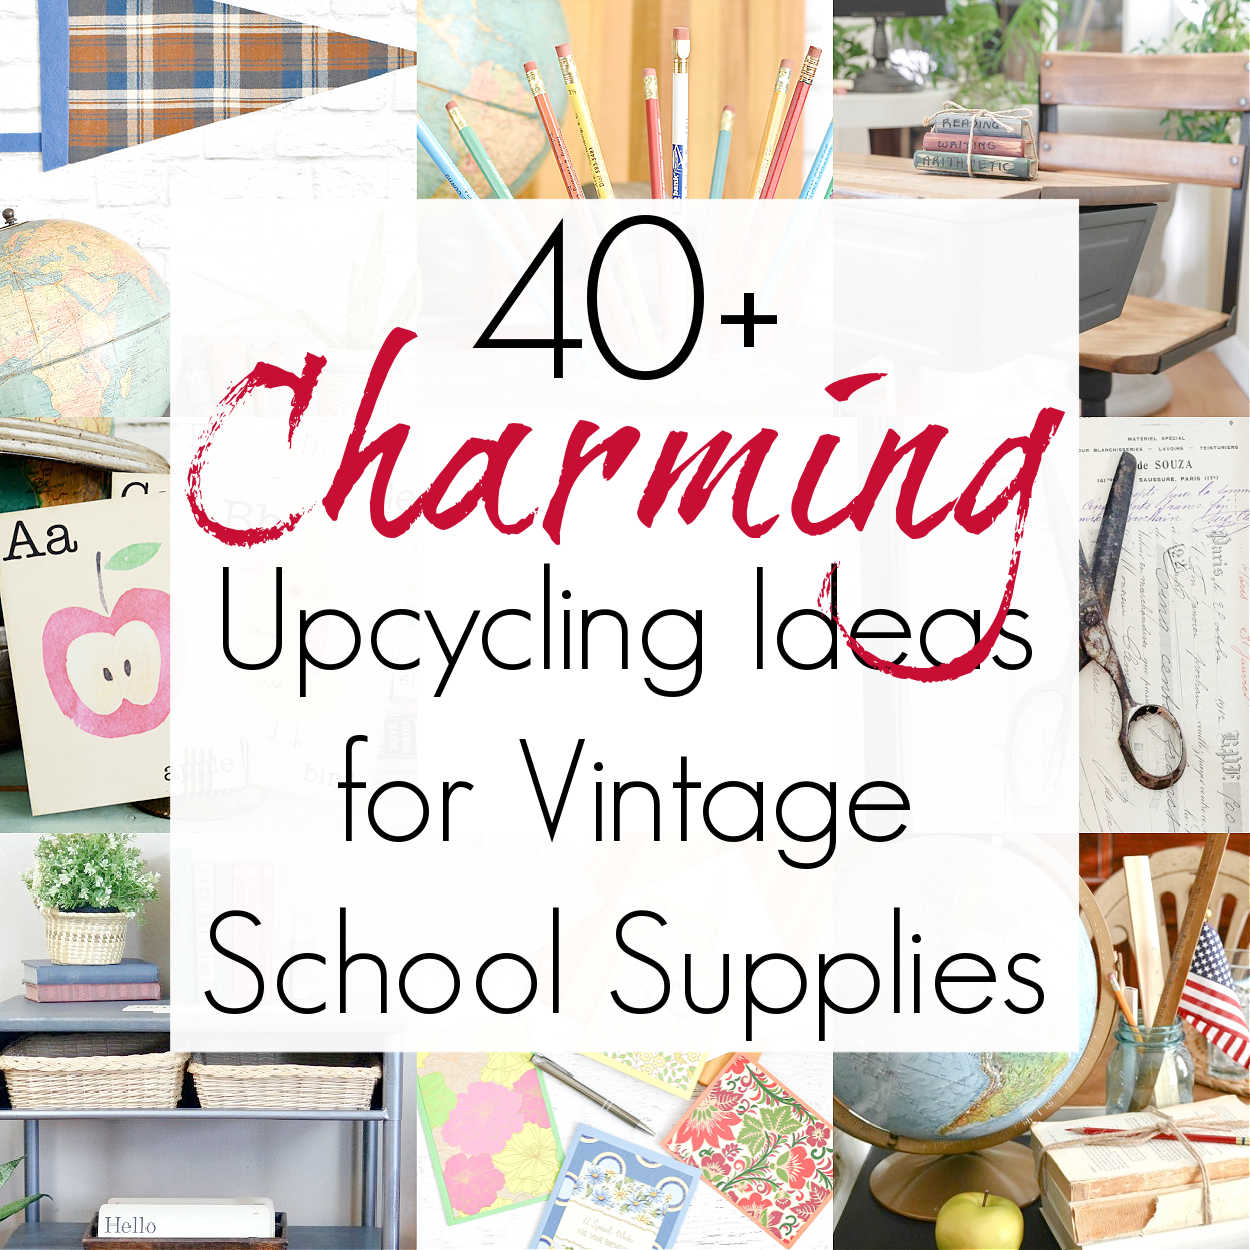 Upcycling Ideas for Vintage School Supplies